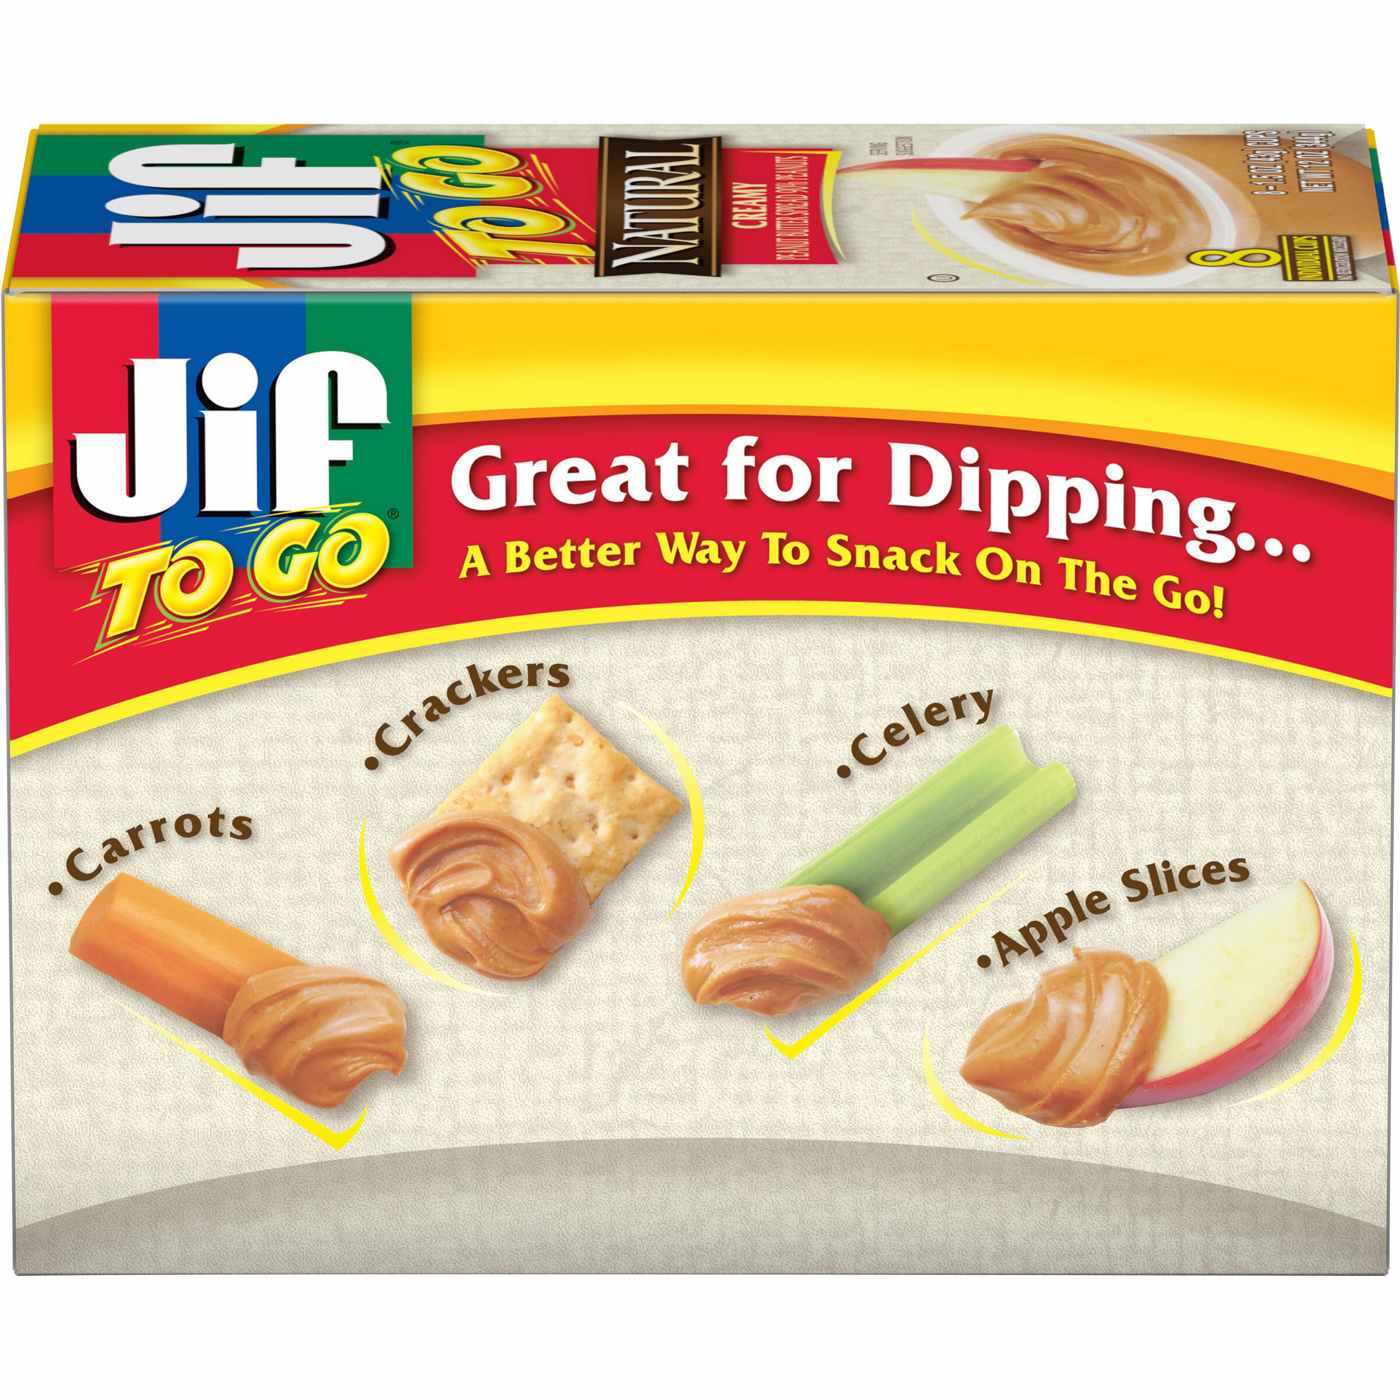 Jif To Go Natural Creamy Peanut Butter 8 pk Cups; image 2 of 5